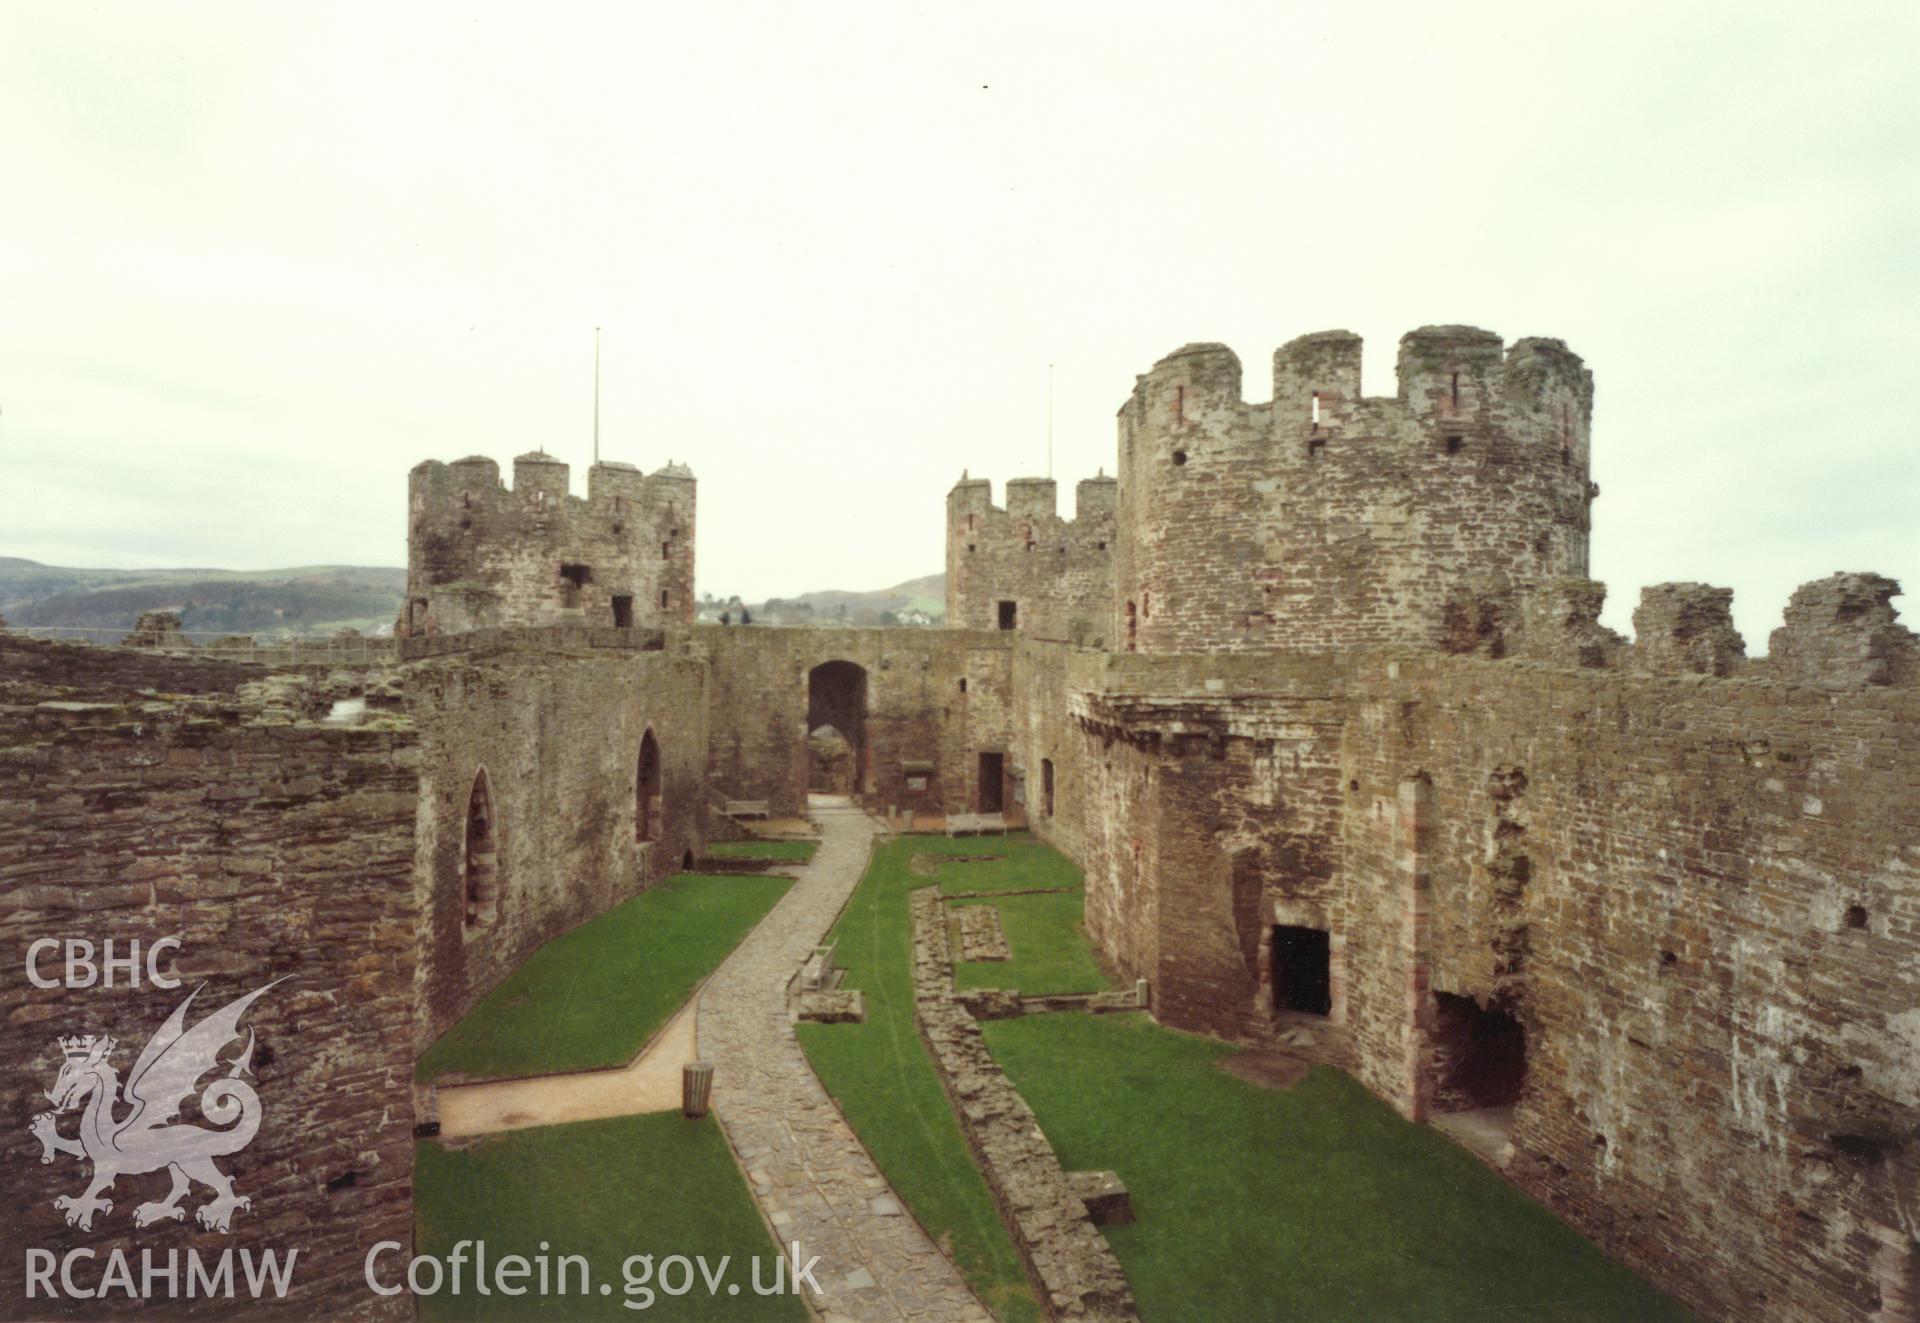 1 of a set of 27 colour prints: print showing interior view of Conwy castle, collated by the former Central Office of Information.